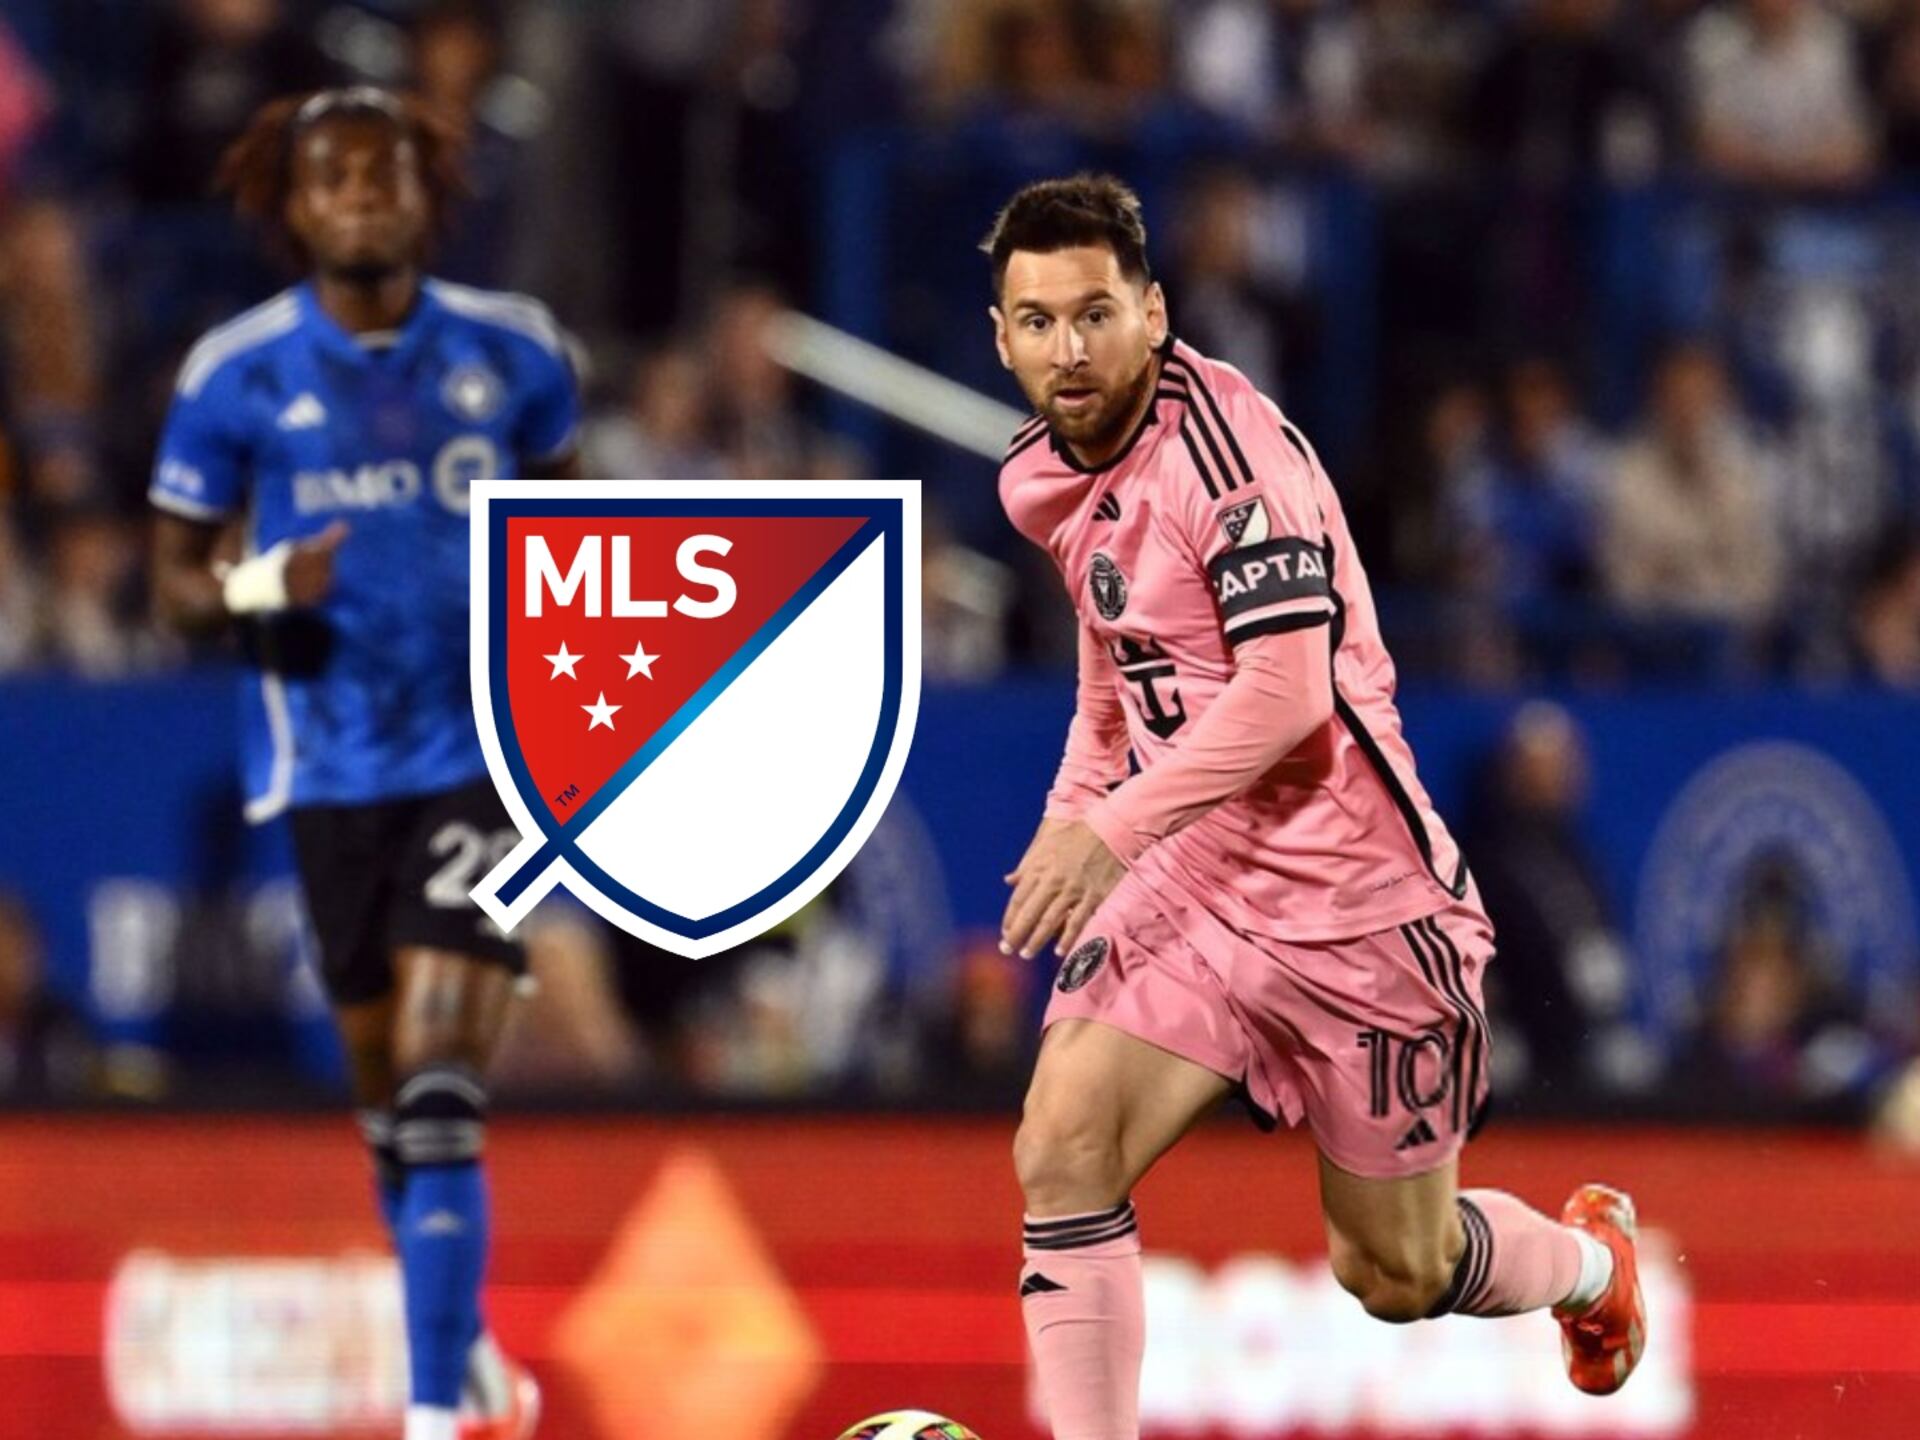 (VIDEO) Messi was angry, the harsh comment of Messi about the MLS which could bring him consequences